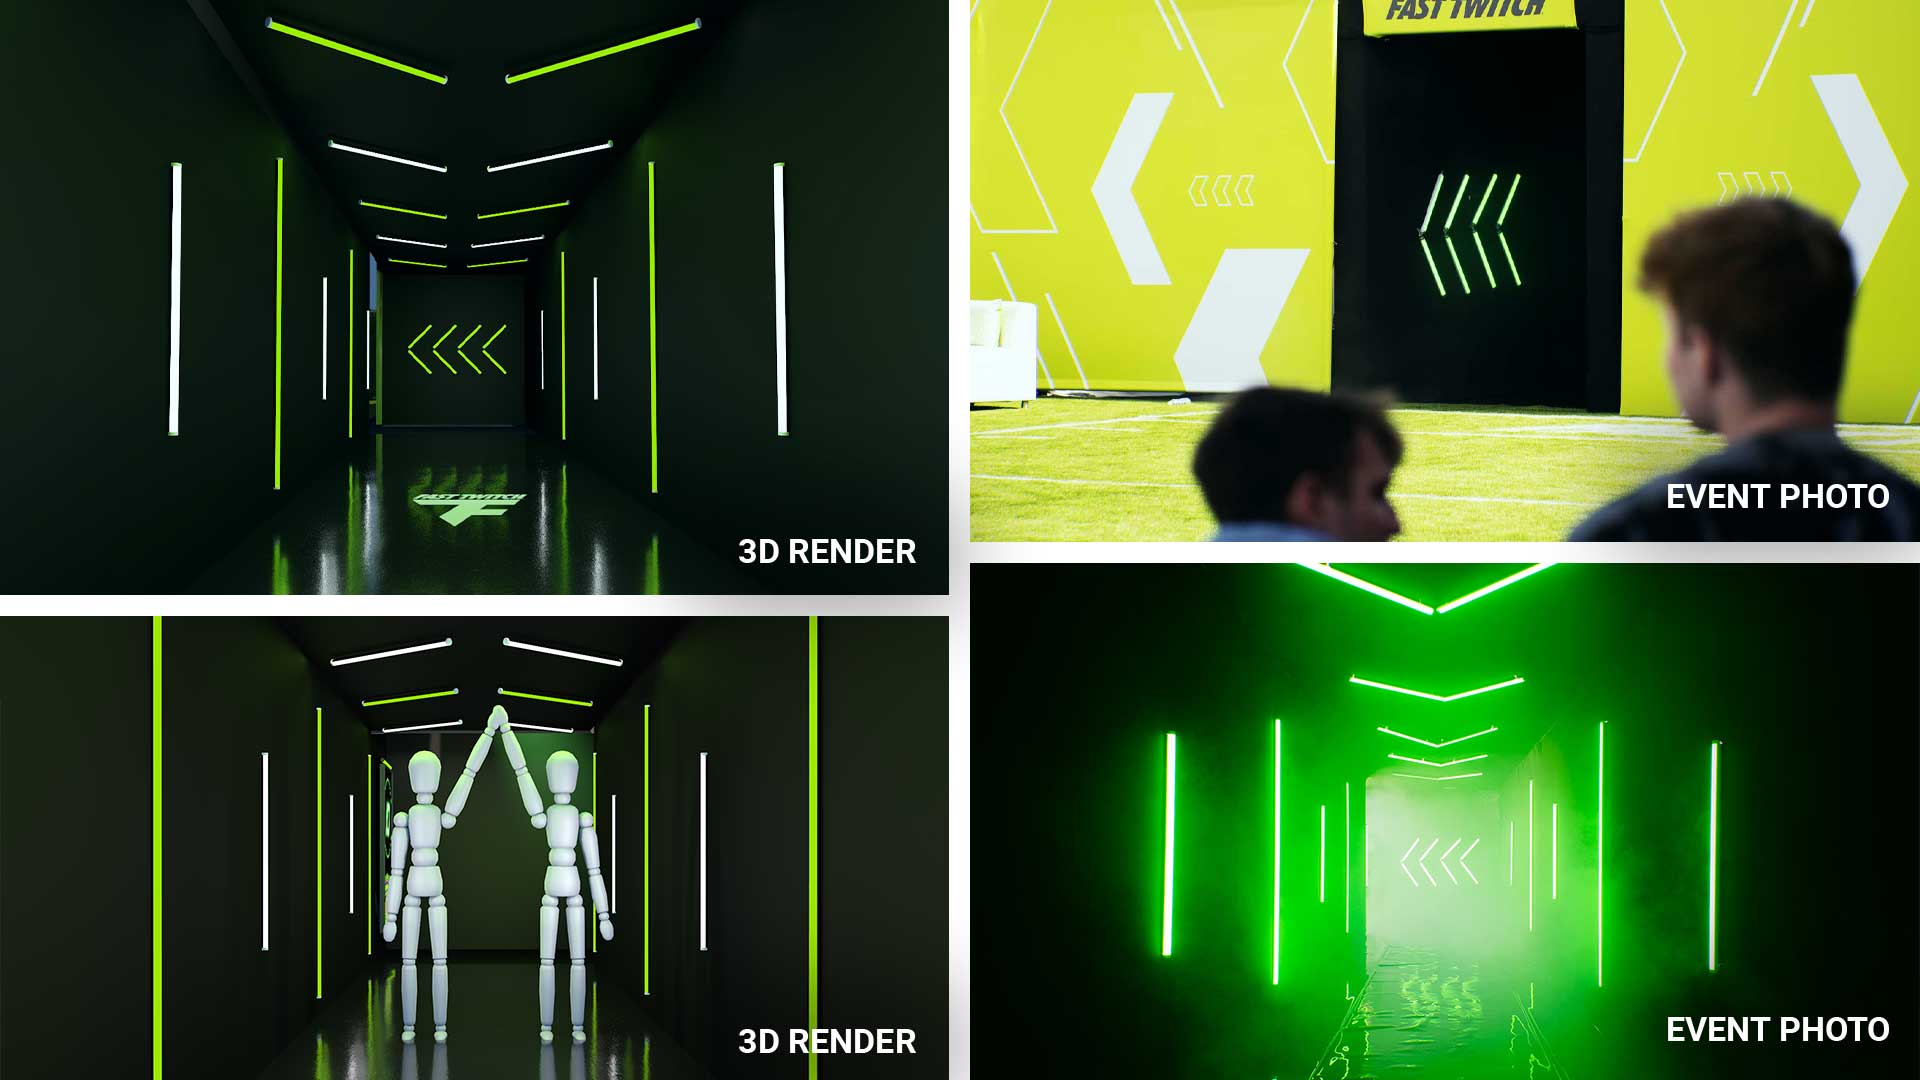 Four images of renders of the tunnel compared to the practical tunnel